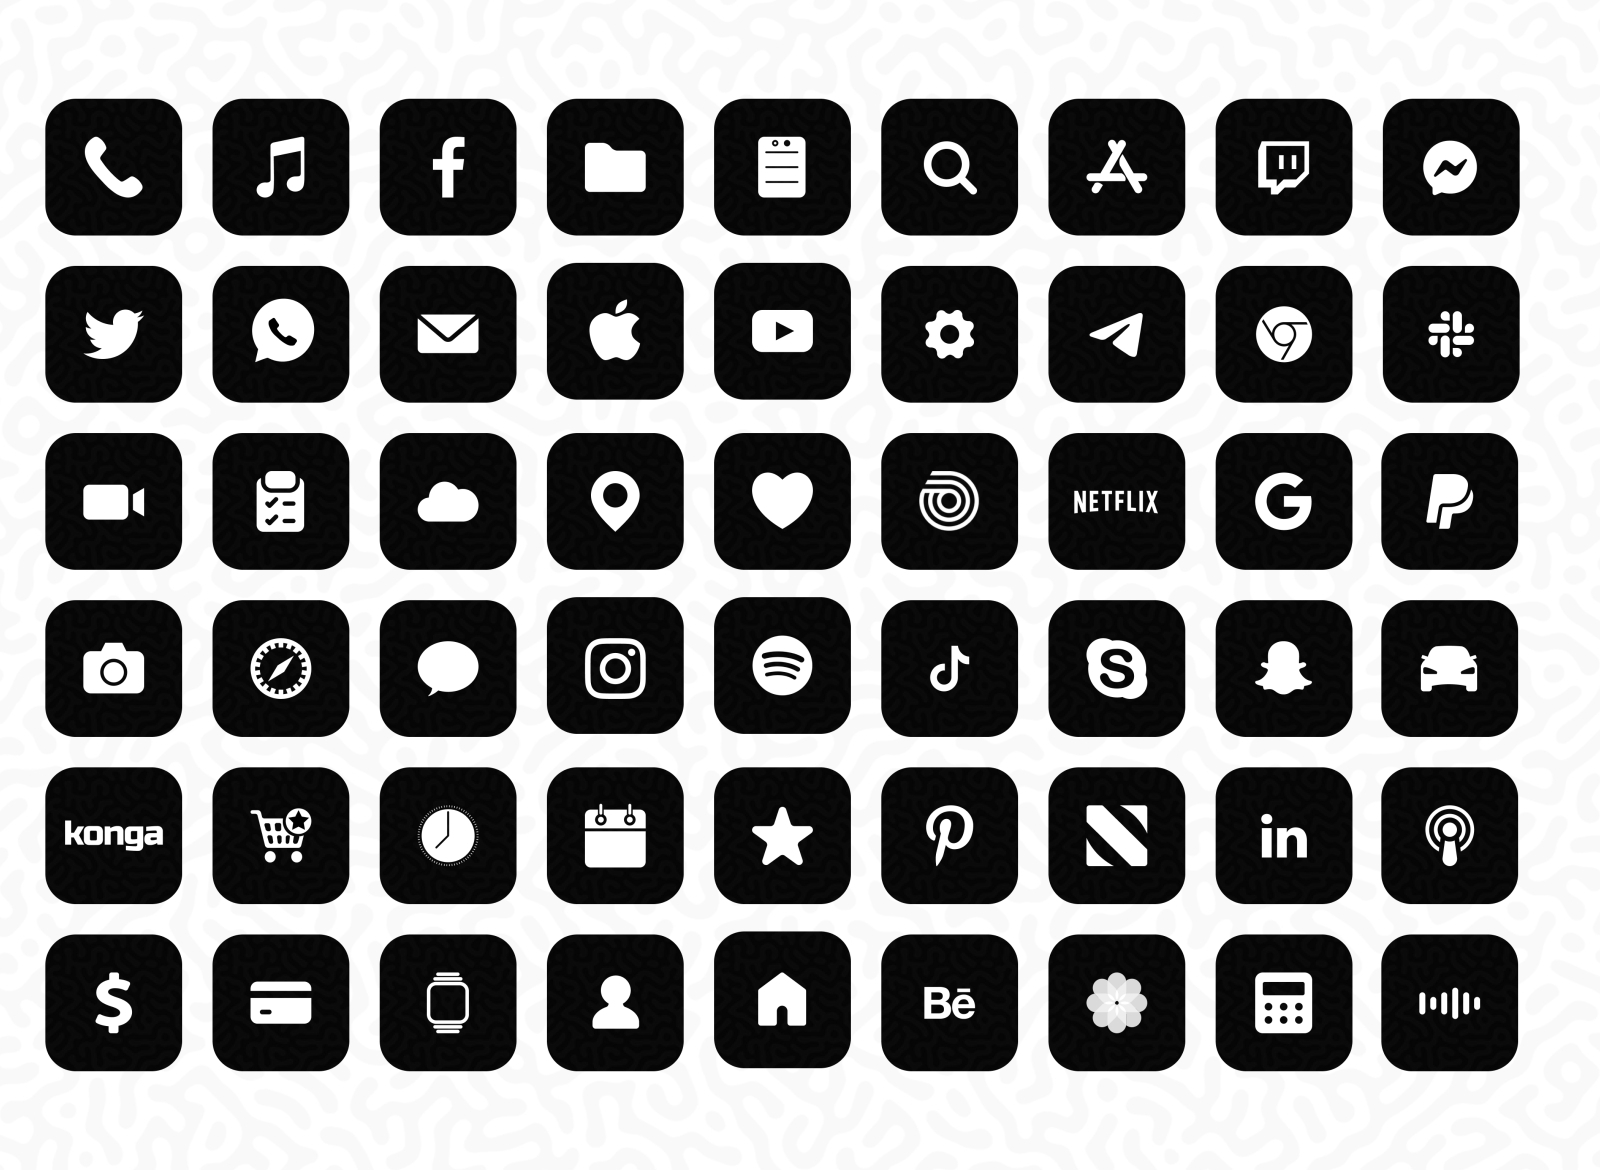 iOS 14 Minimal Black & White Icon Pack by TSMUSTY on Dribbble